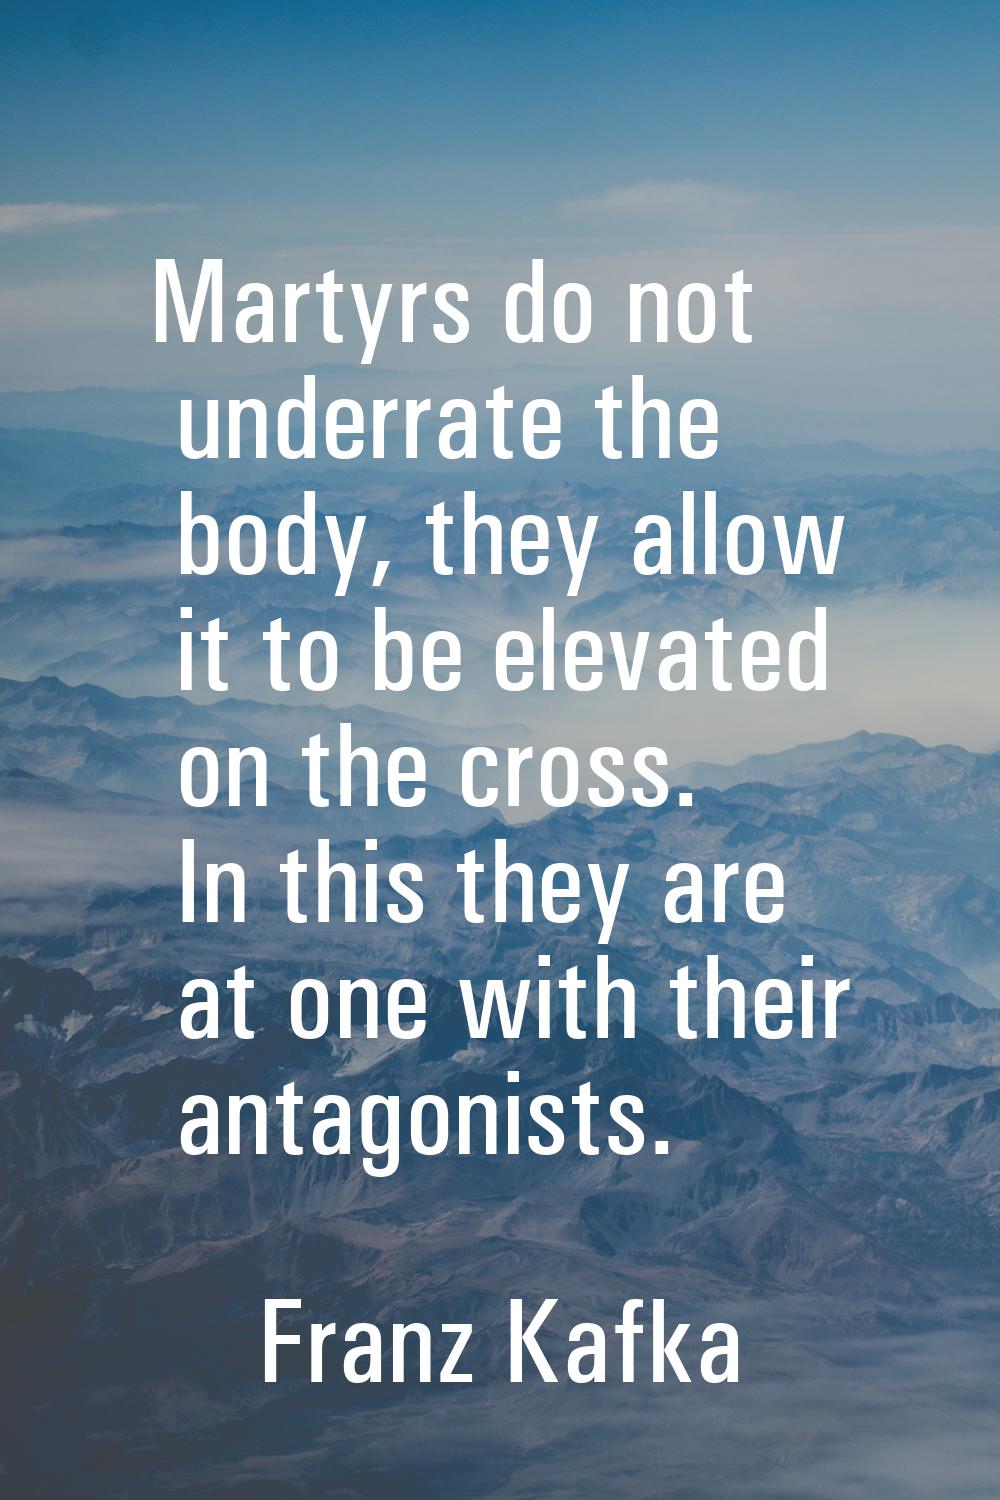 Martyrs do not underrate the body, they allow it to be elevated on the cross. In this they are at o